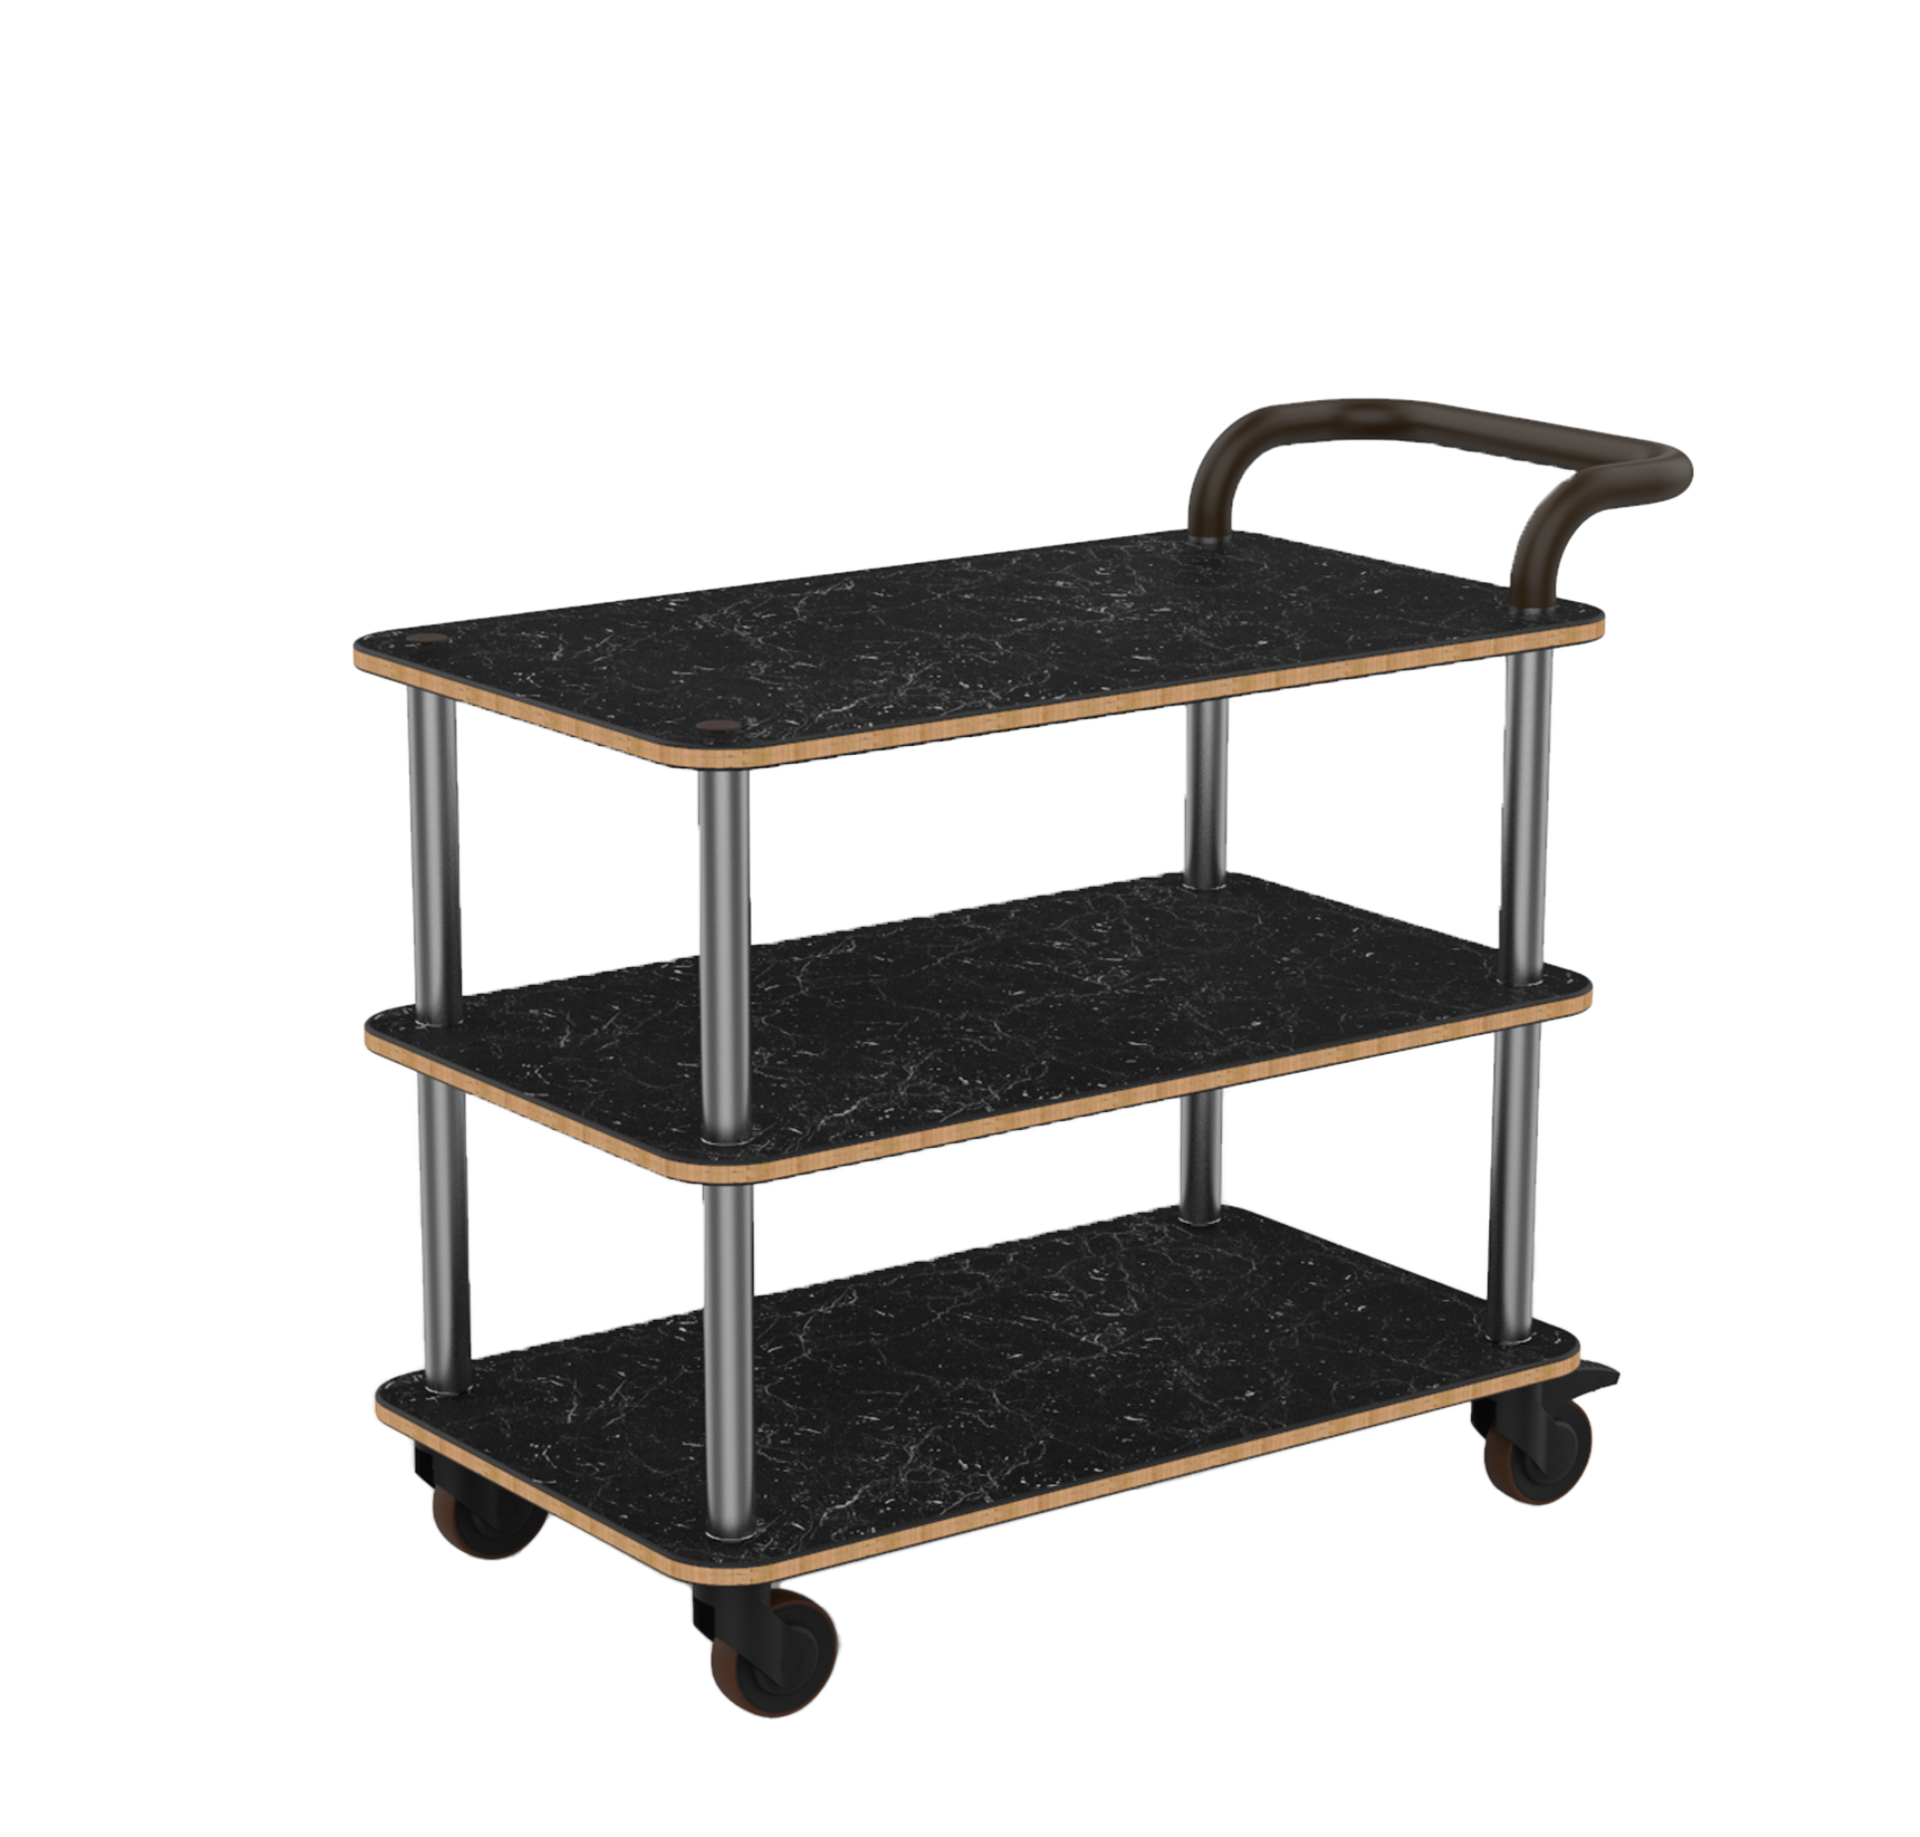 SERVICE CART WITH LEATHER HANDLE